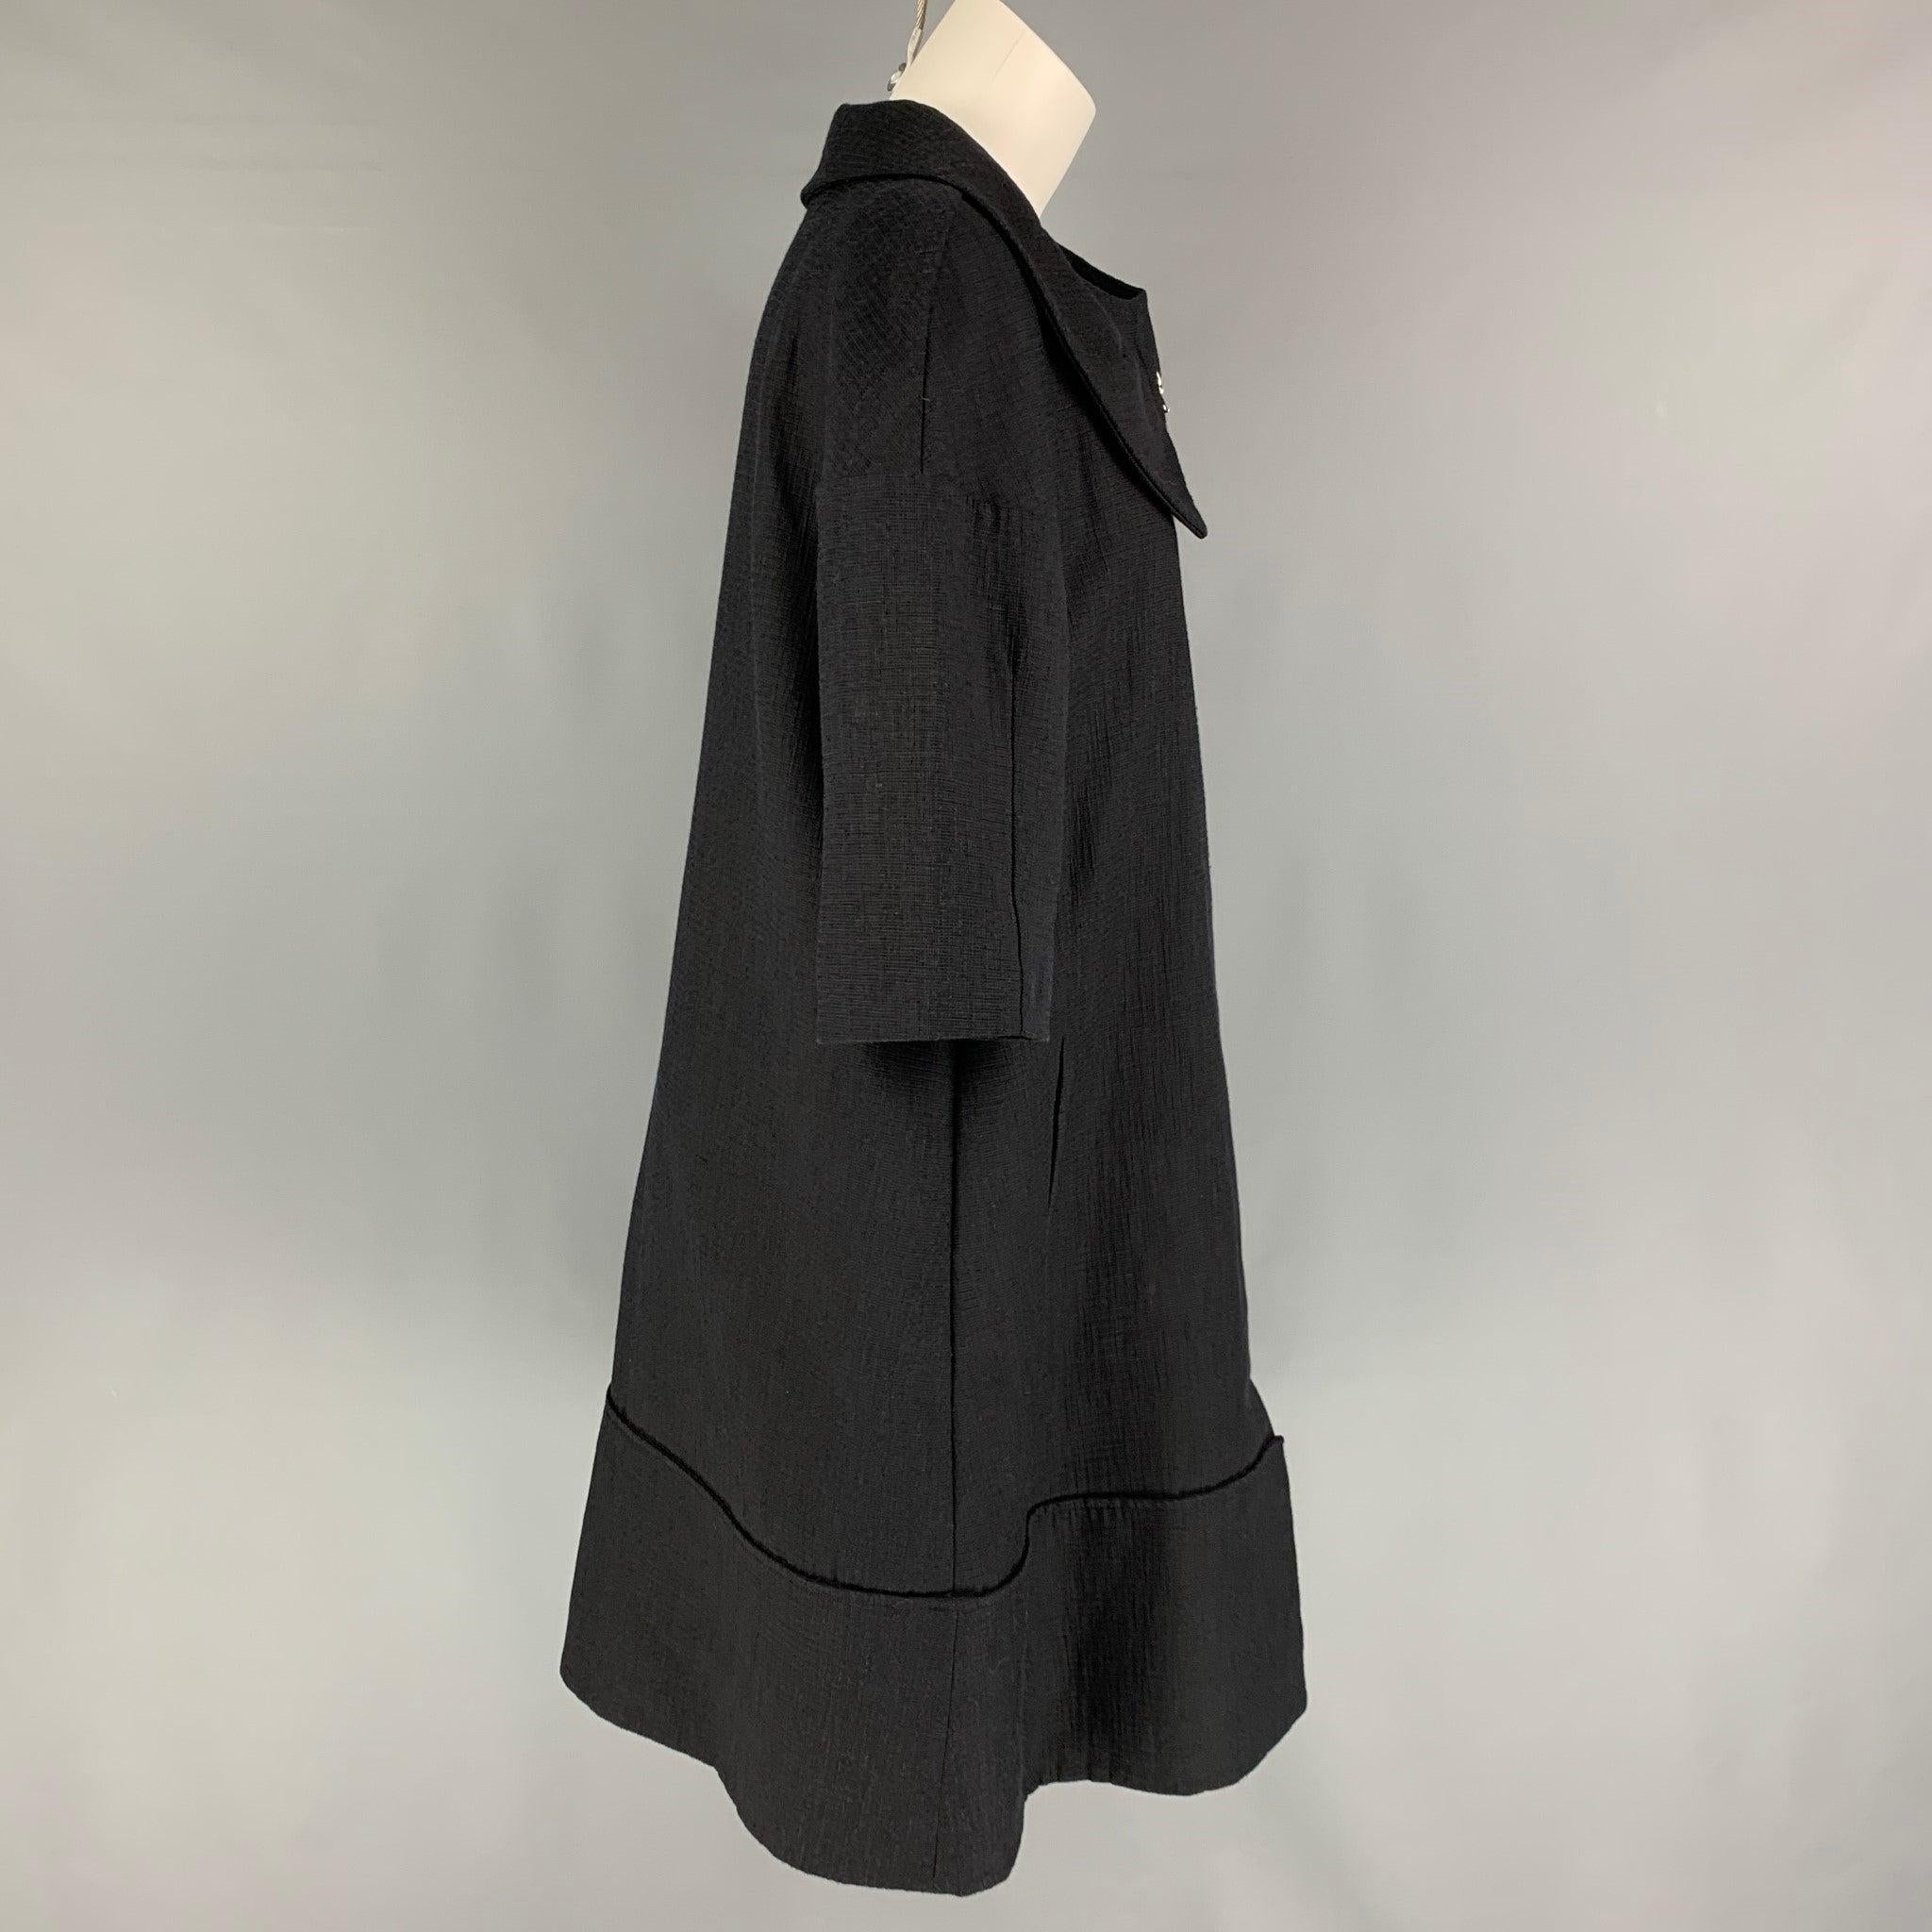 MARNI coat comes in a black textured cotton blend featuring a structured collar, slit pockets, short sleeves, and a full zip up closure. Made in Italy.
Very Good
Pre-Owned Condition. 

Marked:   44 

Measurements: 
 
Shoulder: 23 inches  Bust: 40